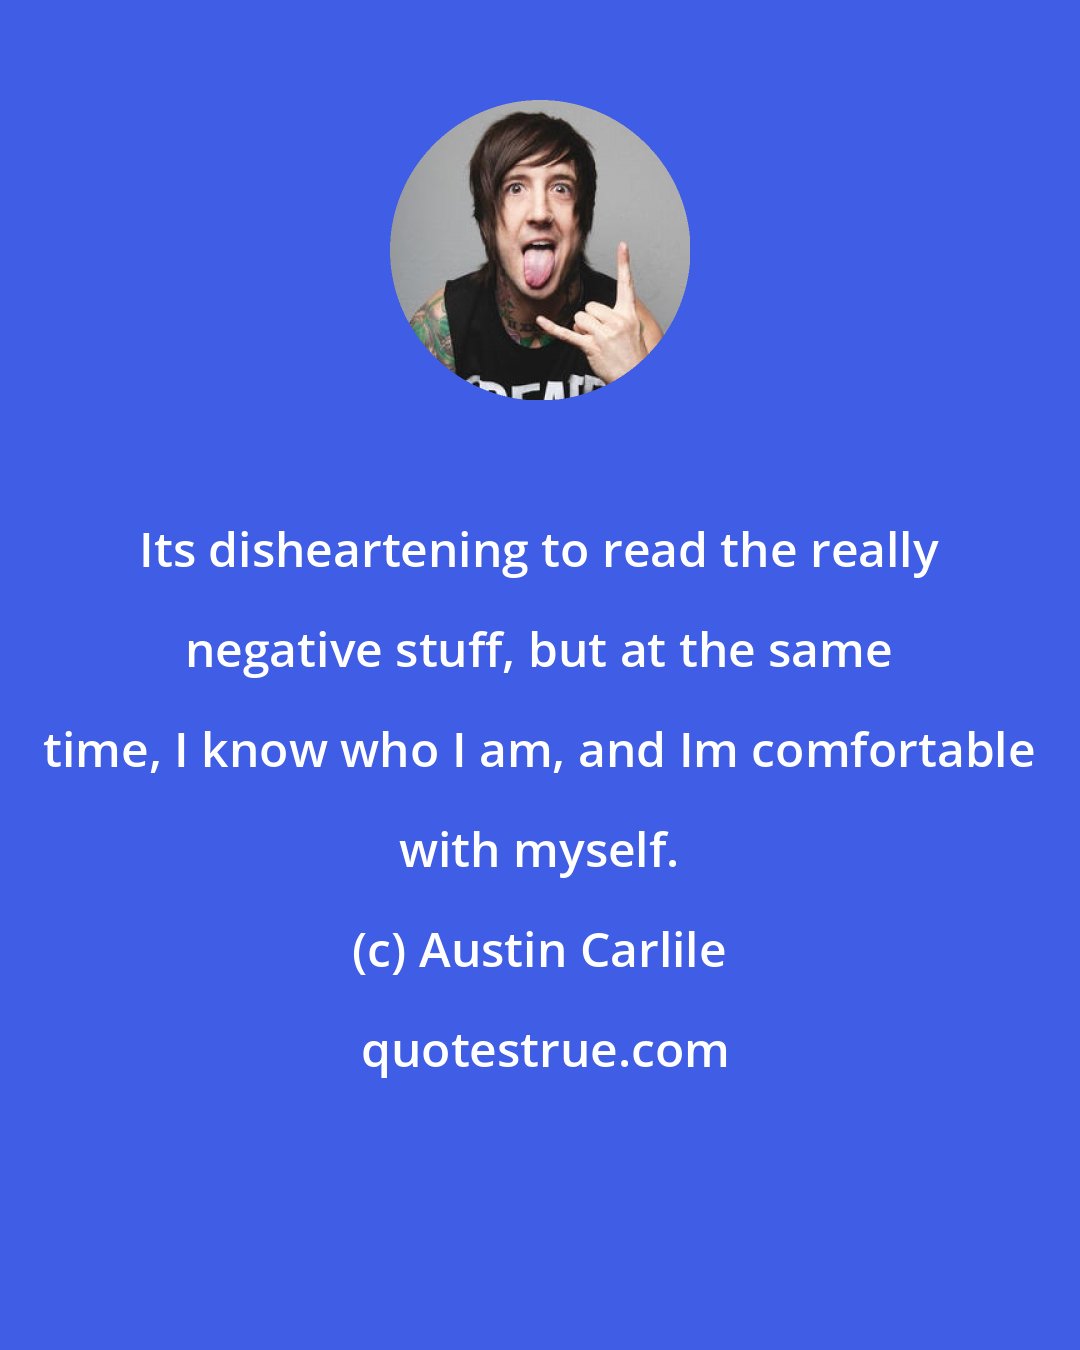 Austin Carlile: Its disheartening to read the really negative stuff, but at the same time, I know who I am, and Im comfortable with myself.